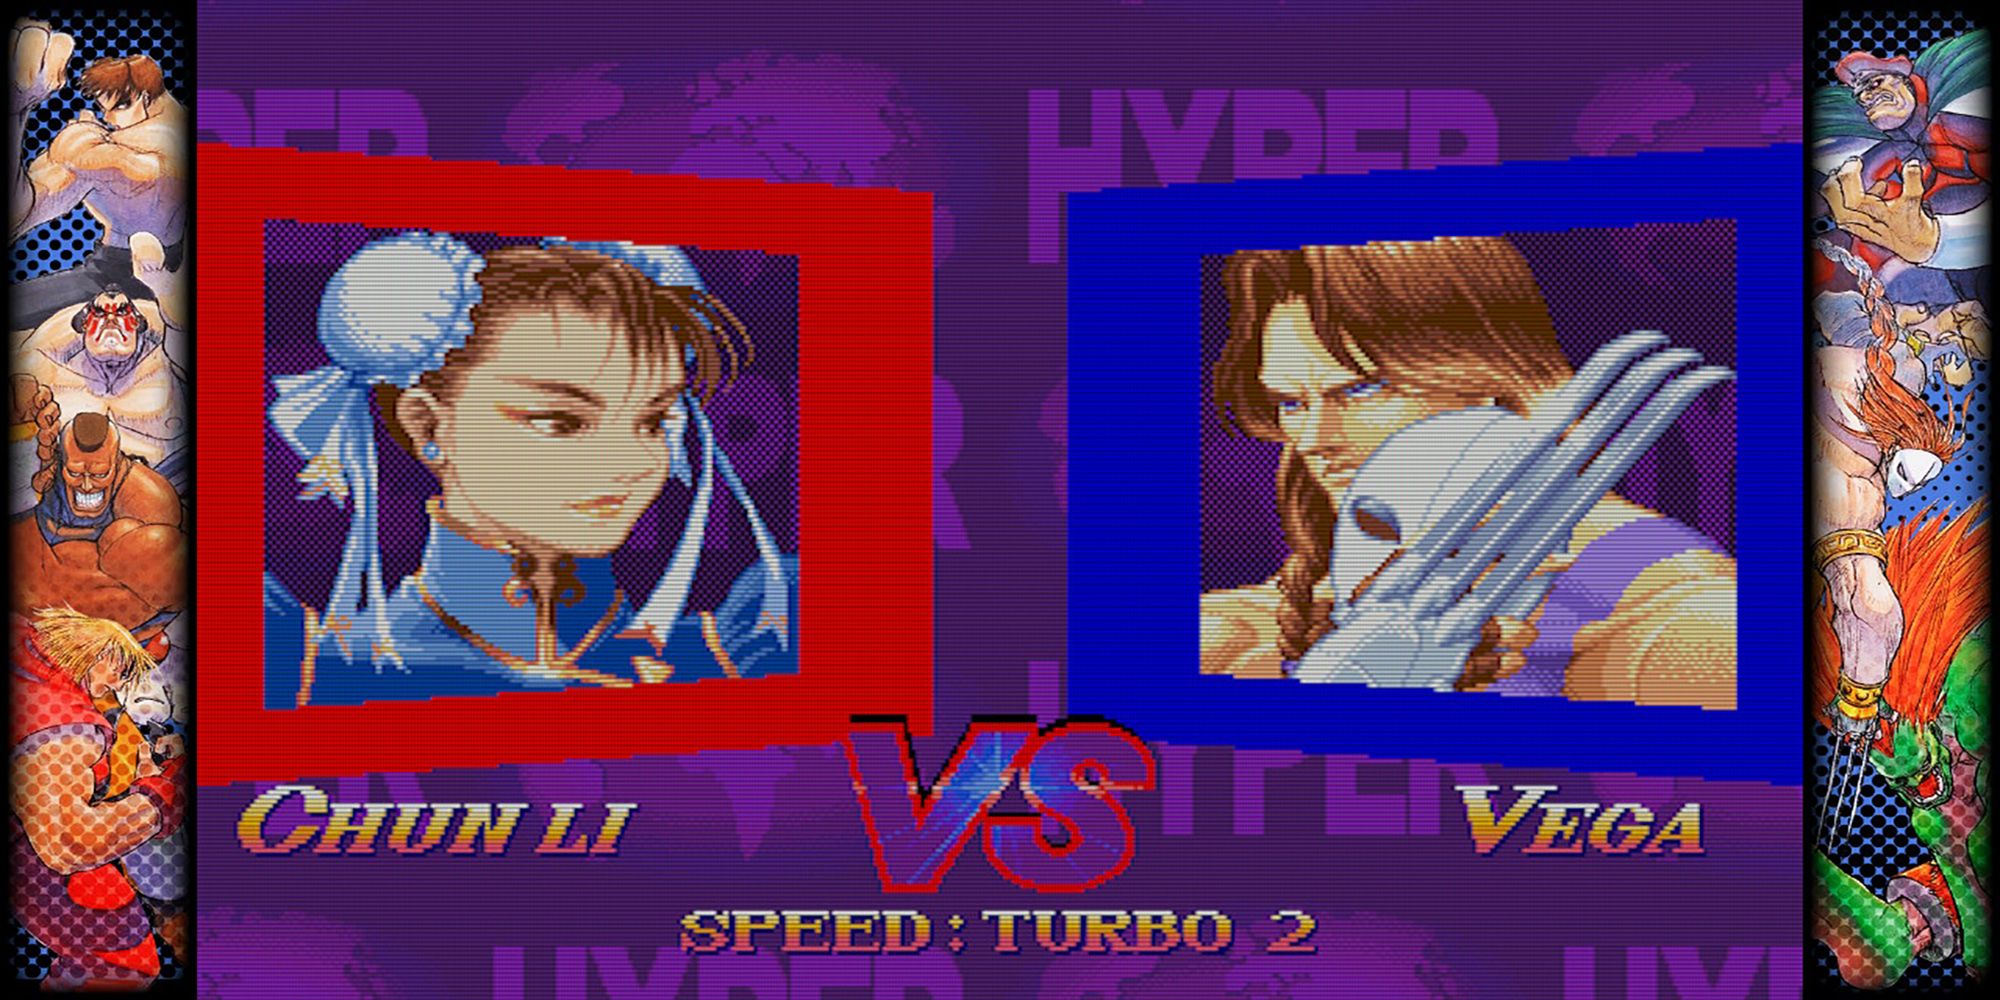 Hyper Street Fighter 2's VS screen announces a battle between Chun-li and Vega in Capcom Fighting Collection.